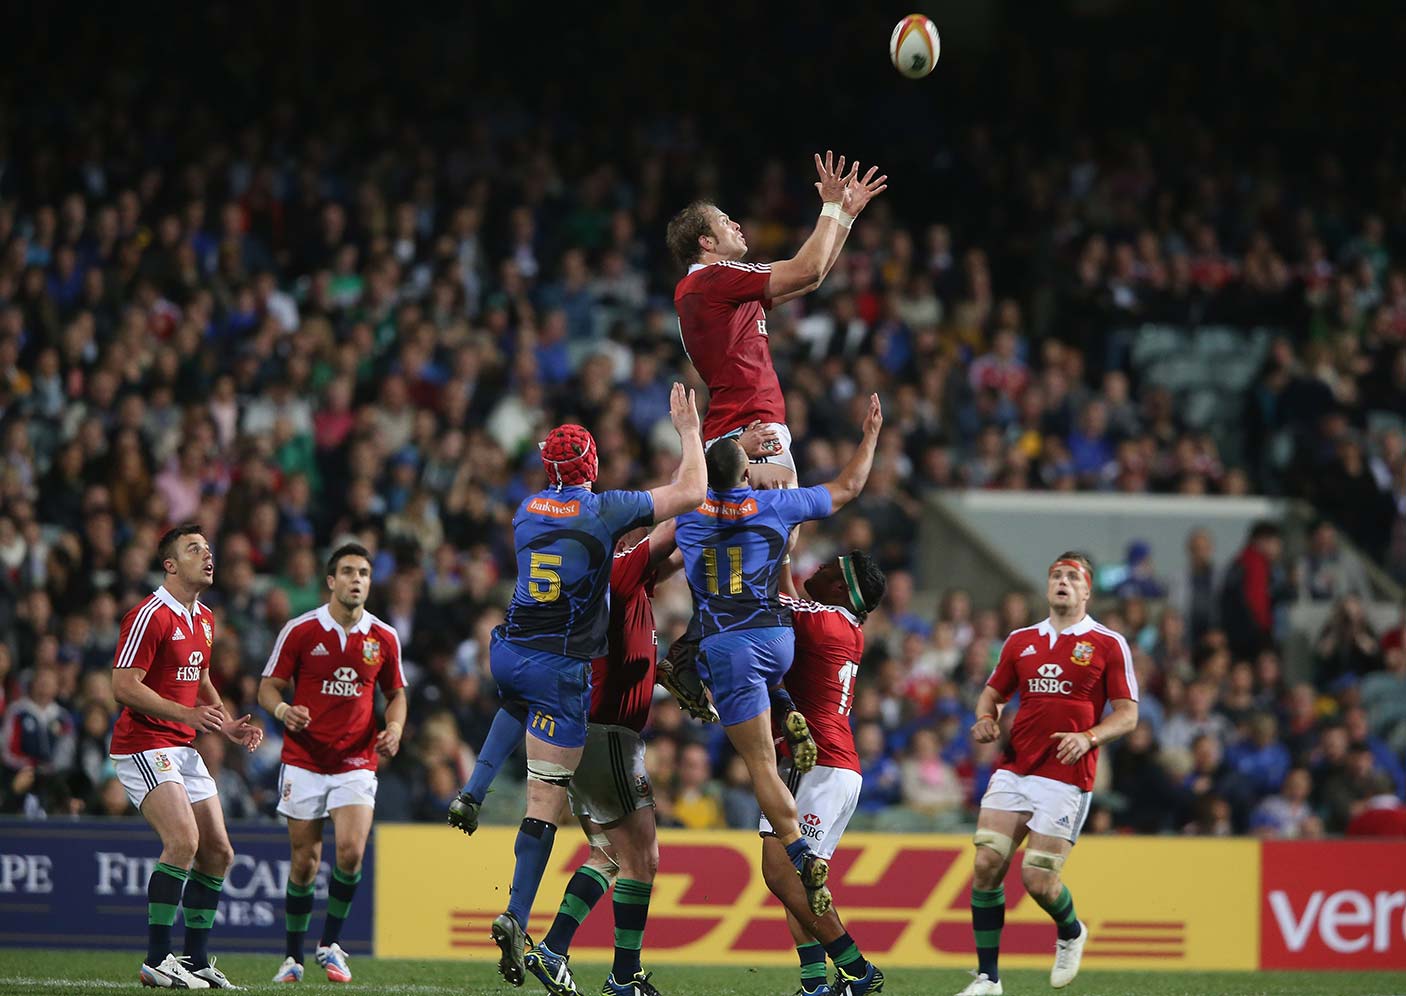 Alun Wyn Jones of the Lions catches the ball during the tour match between the Western Force and the British & Irish Lions